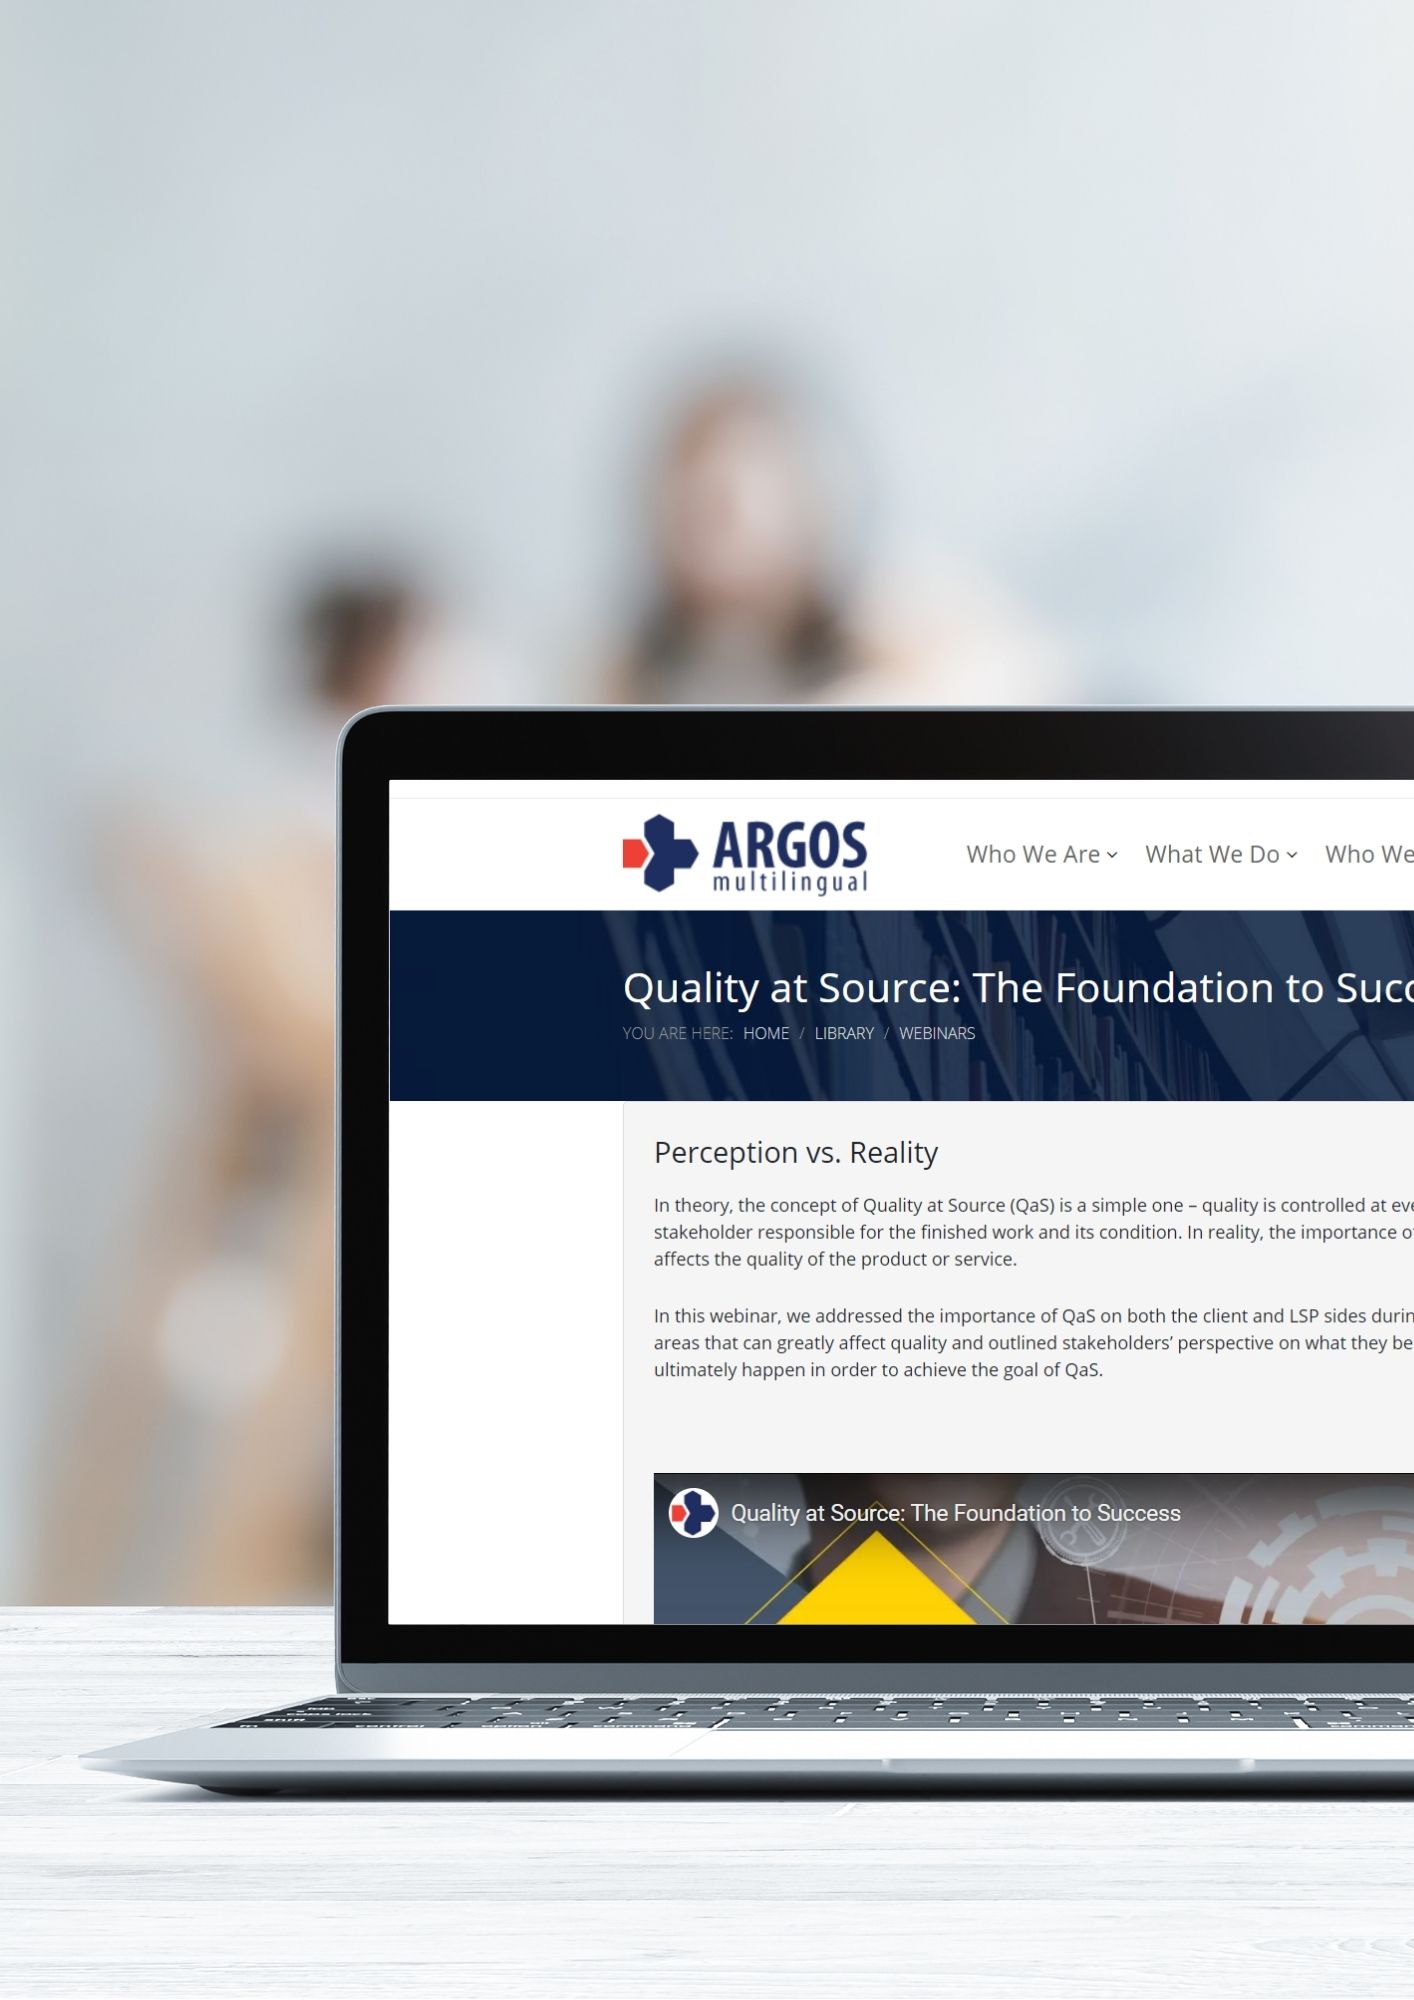 Quality at Source: The Foundation to Success